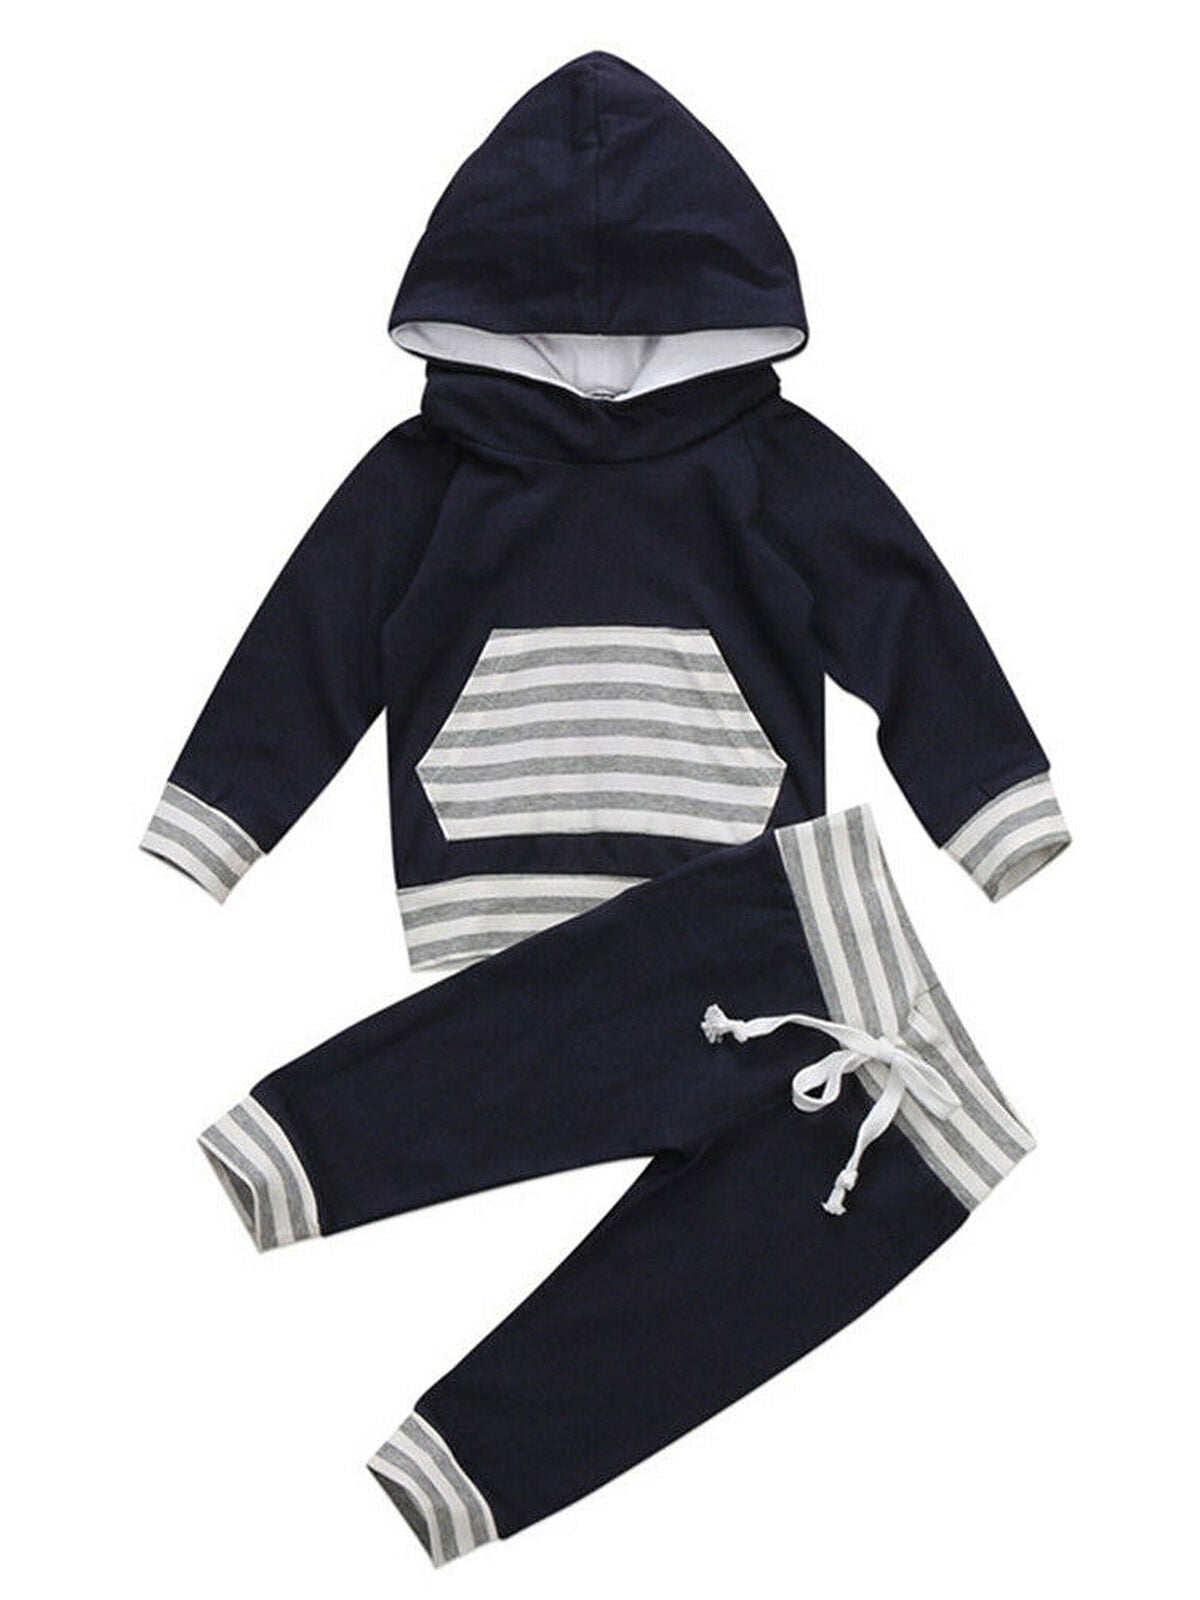 Newborn Infant Toddler Baby Striped Hoodie Tops Pants 2pcs Outfits Set Clothes 